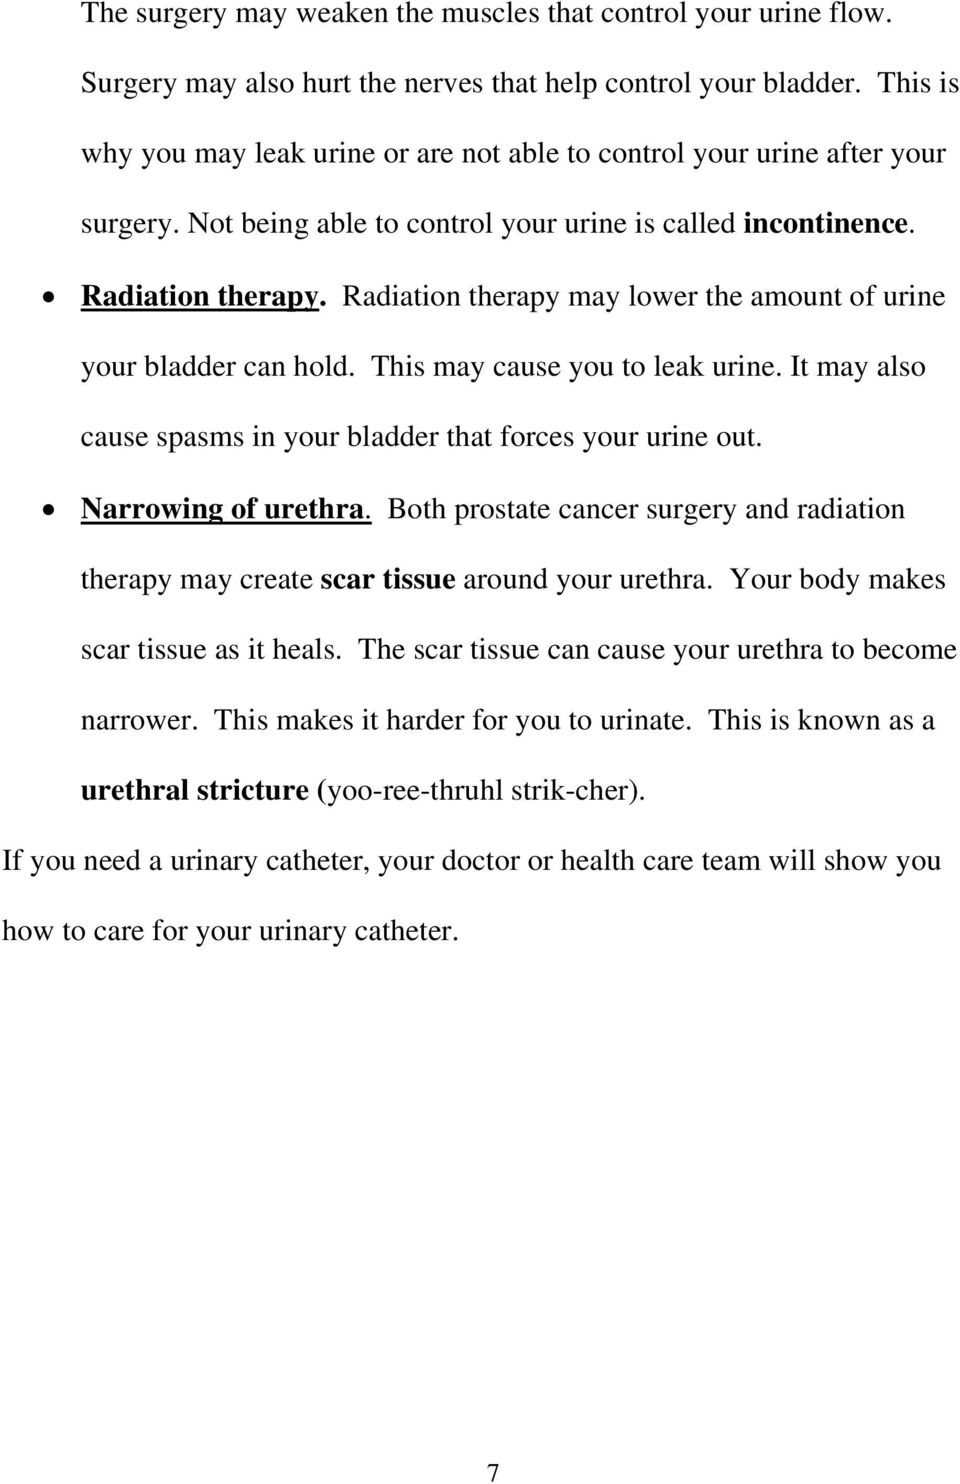 Radiation therapy may lower the amount of urine your bladder can hold. This may cause you to leak urine. It may also cause spasms in your bladder that forces your urine out. Narrowing of urethra.